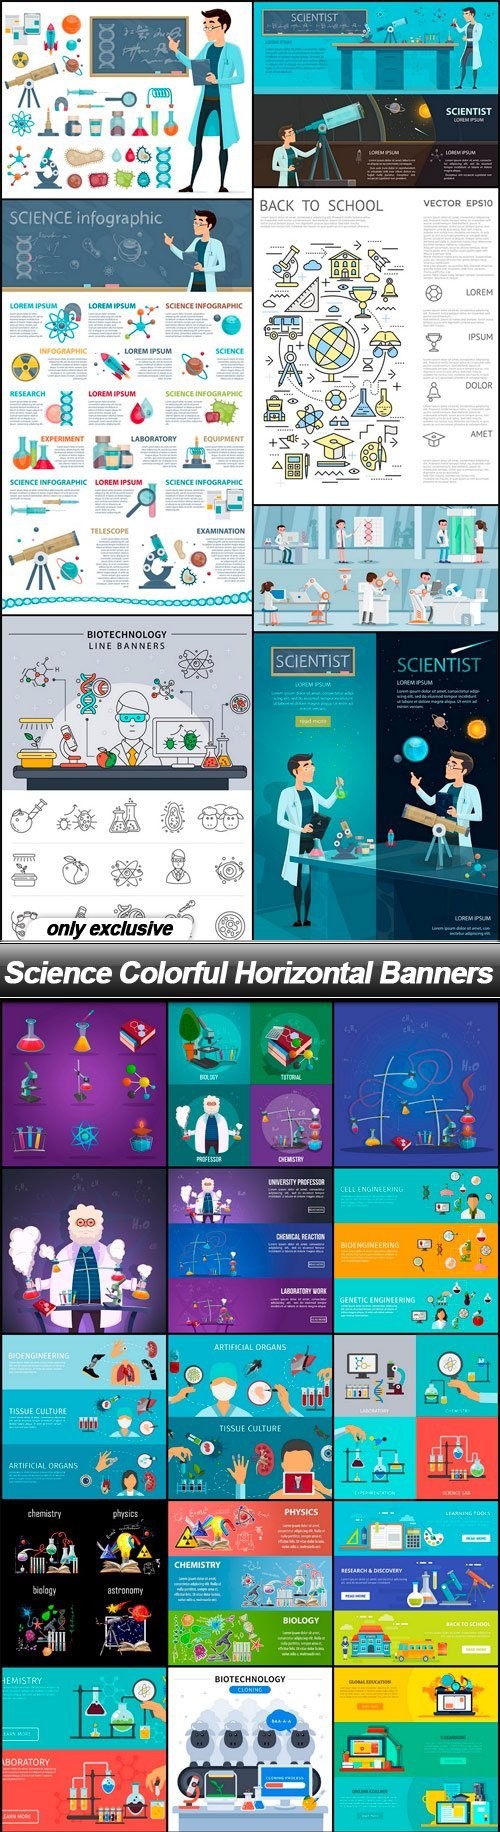 Science Colorful Horizontal Banners - 25 EPS